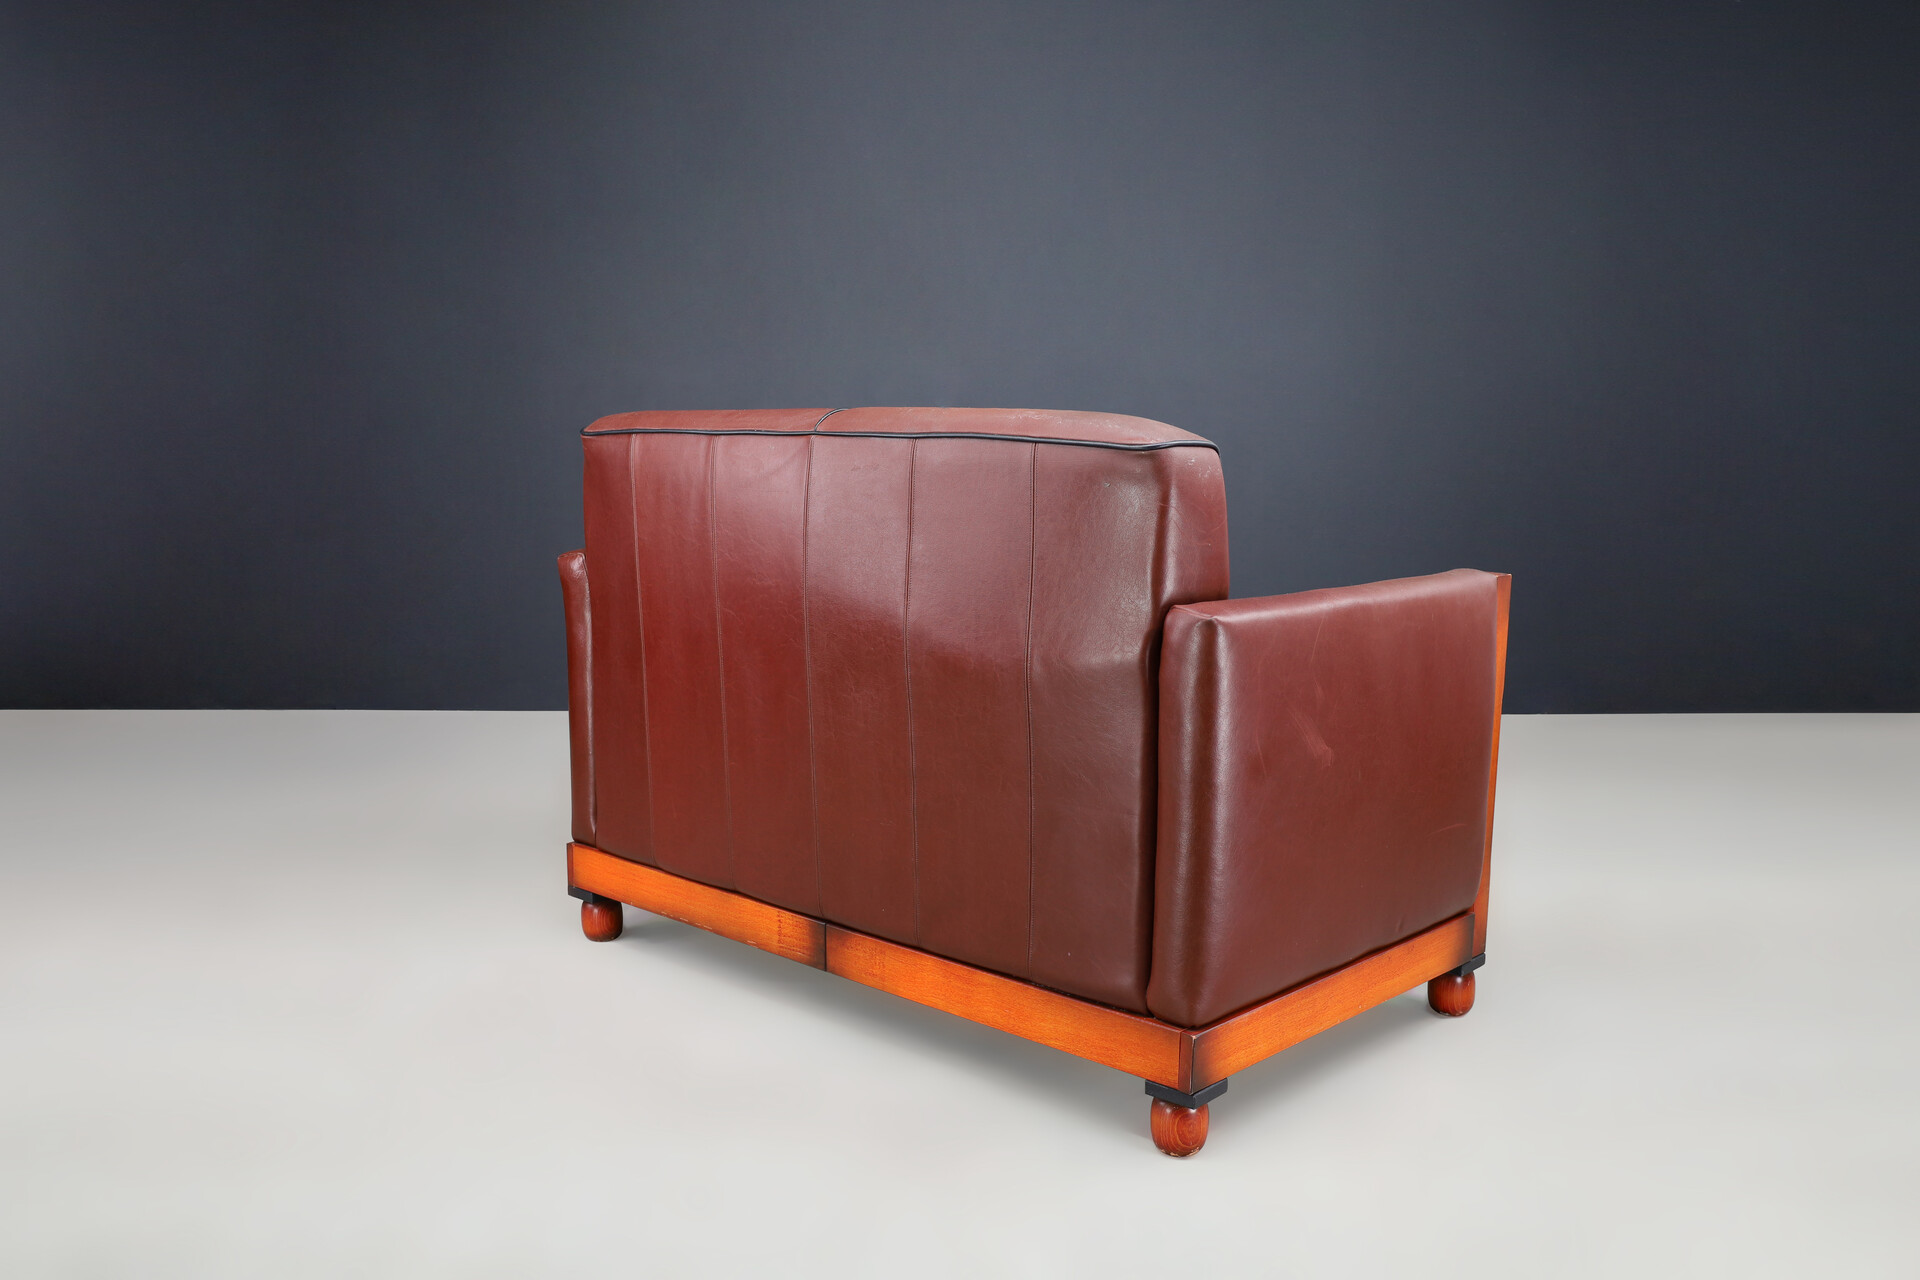 Art deco leather and walnut sofa, The Netherlands 1940s Mid-20th century